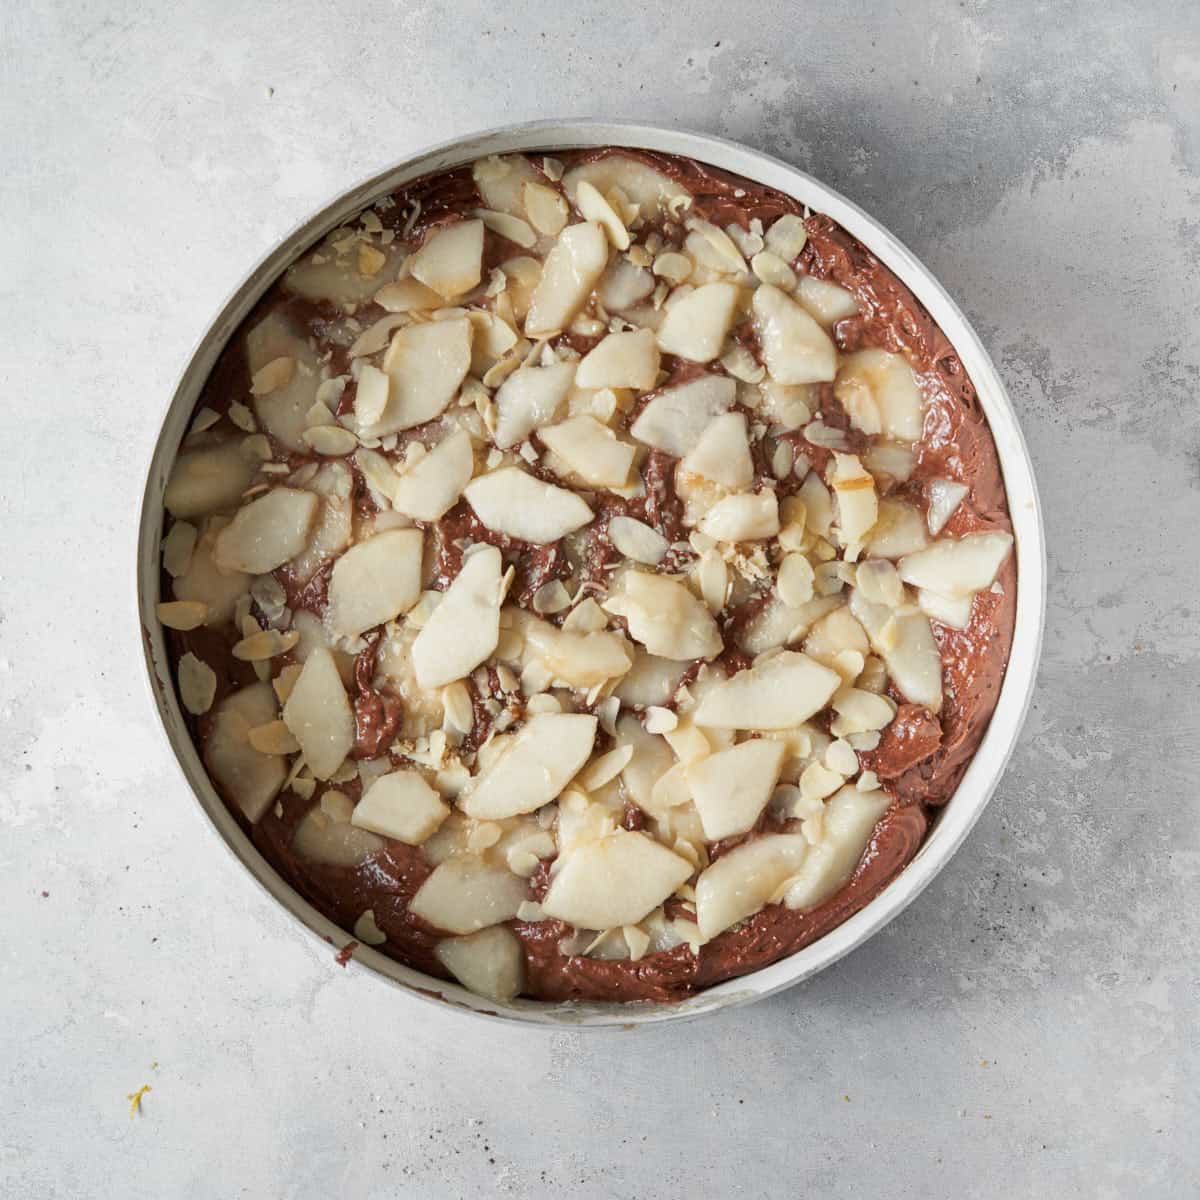 Sprinkle the sliced almonds and finish with the remaining pears